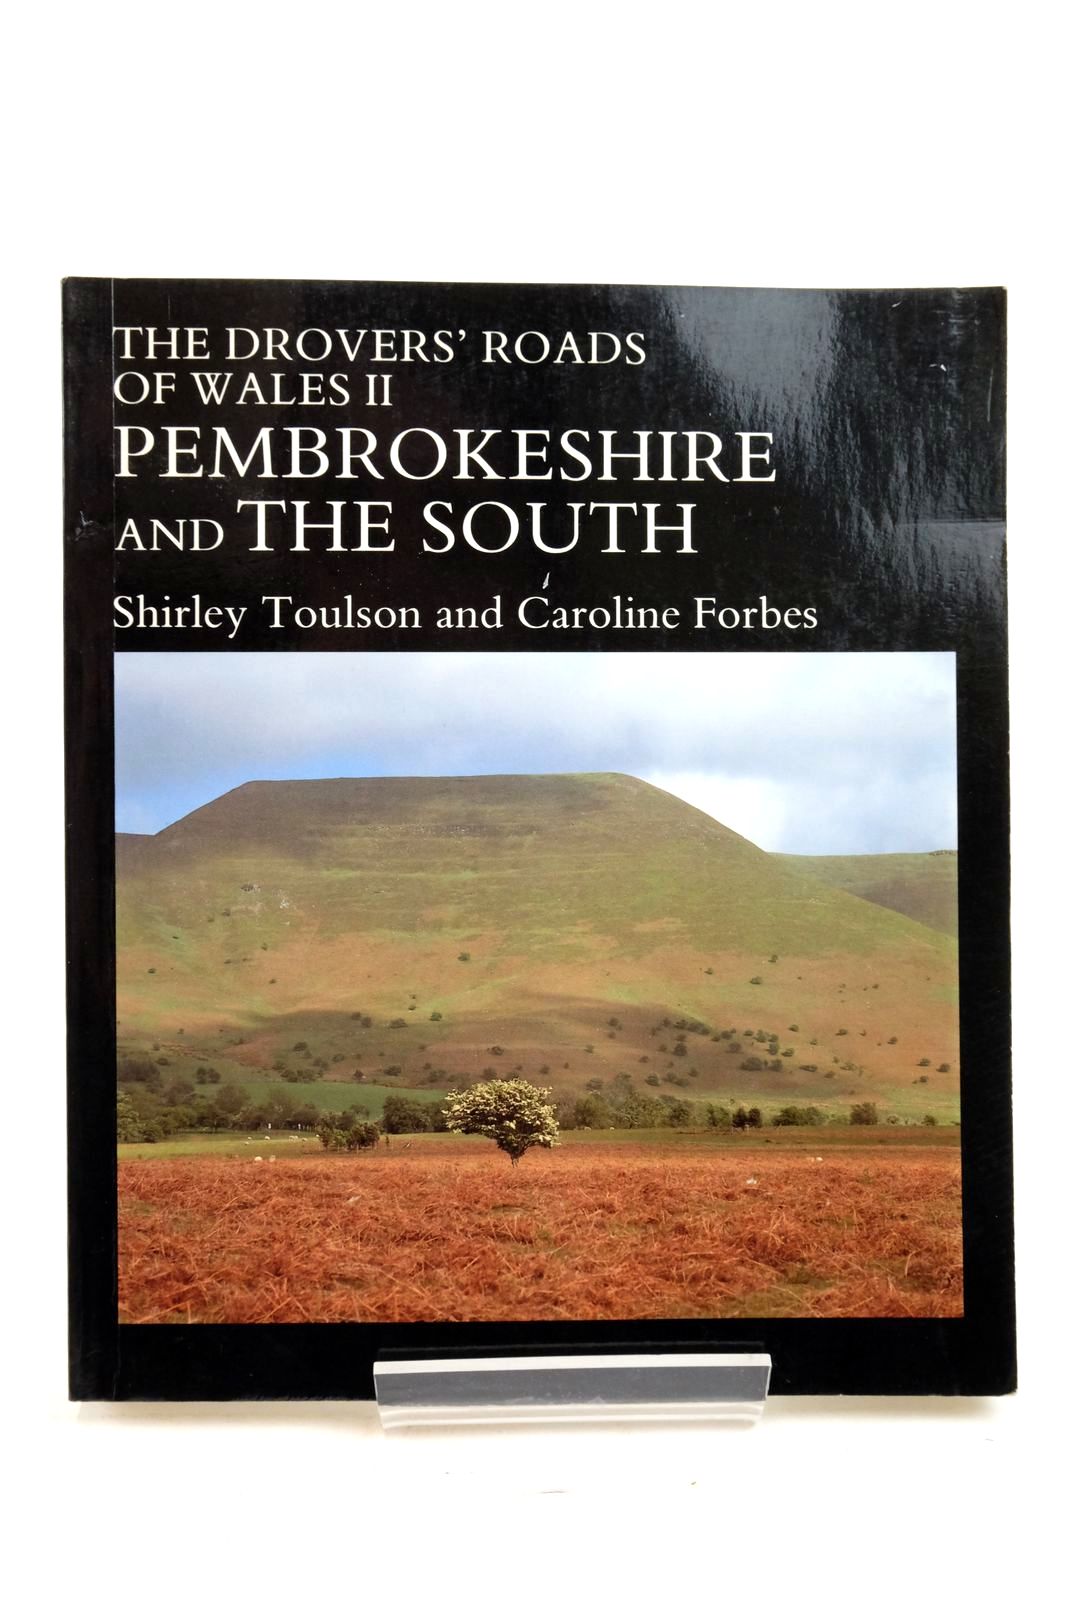 Photo of THE DROVERS' ROADS OF WALES II PEMBROKESHIRE AND THE SOUTH written by Toulson, Shirley published by Whittet Books (STOCK CODE: 2137101)  for sale by Stella & Rose's Books